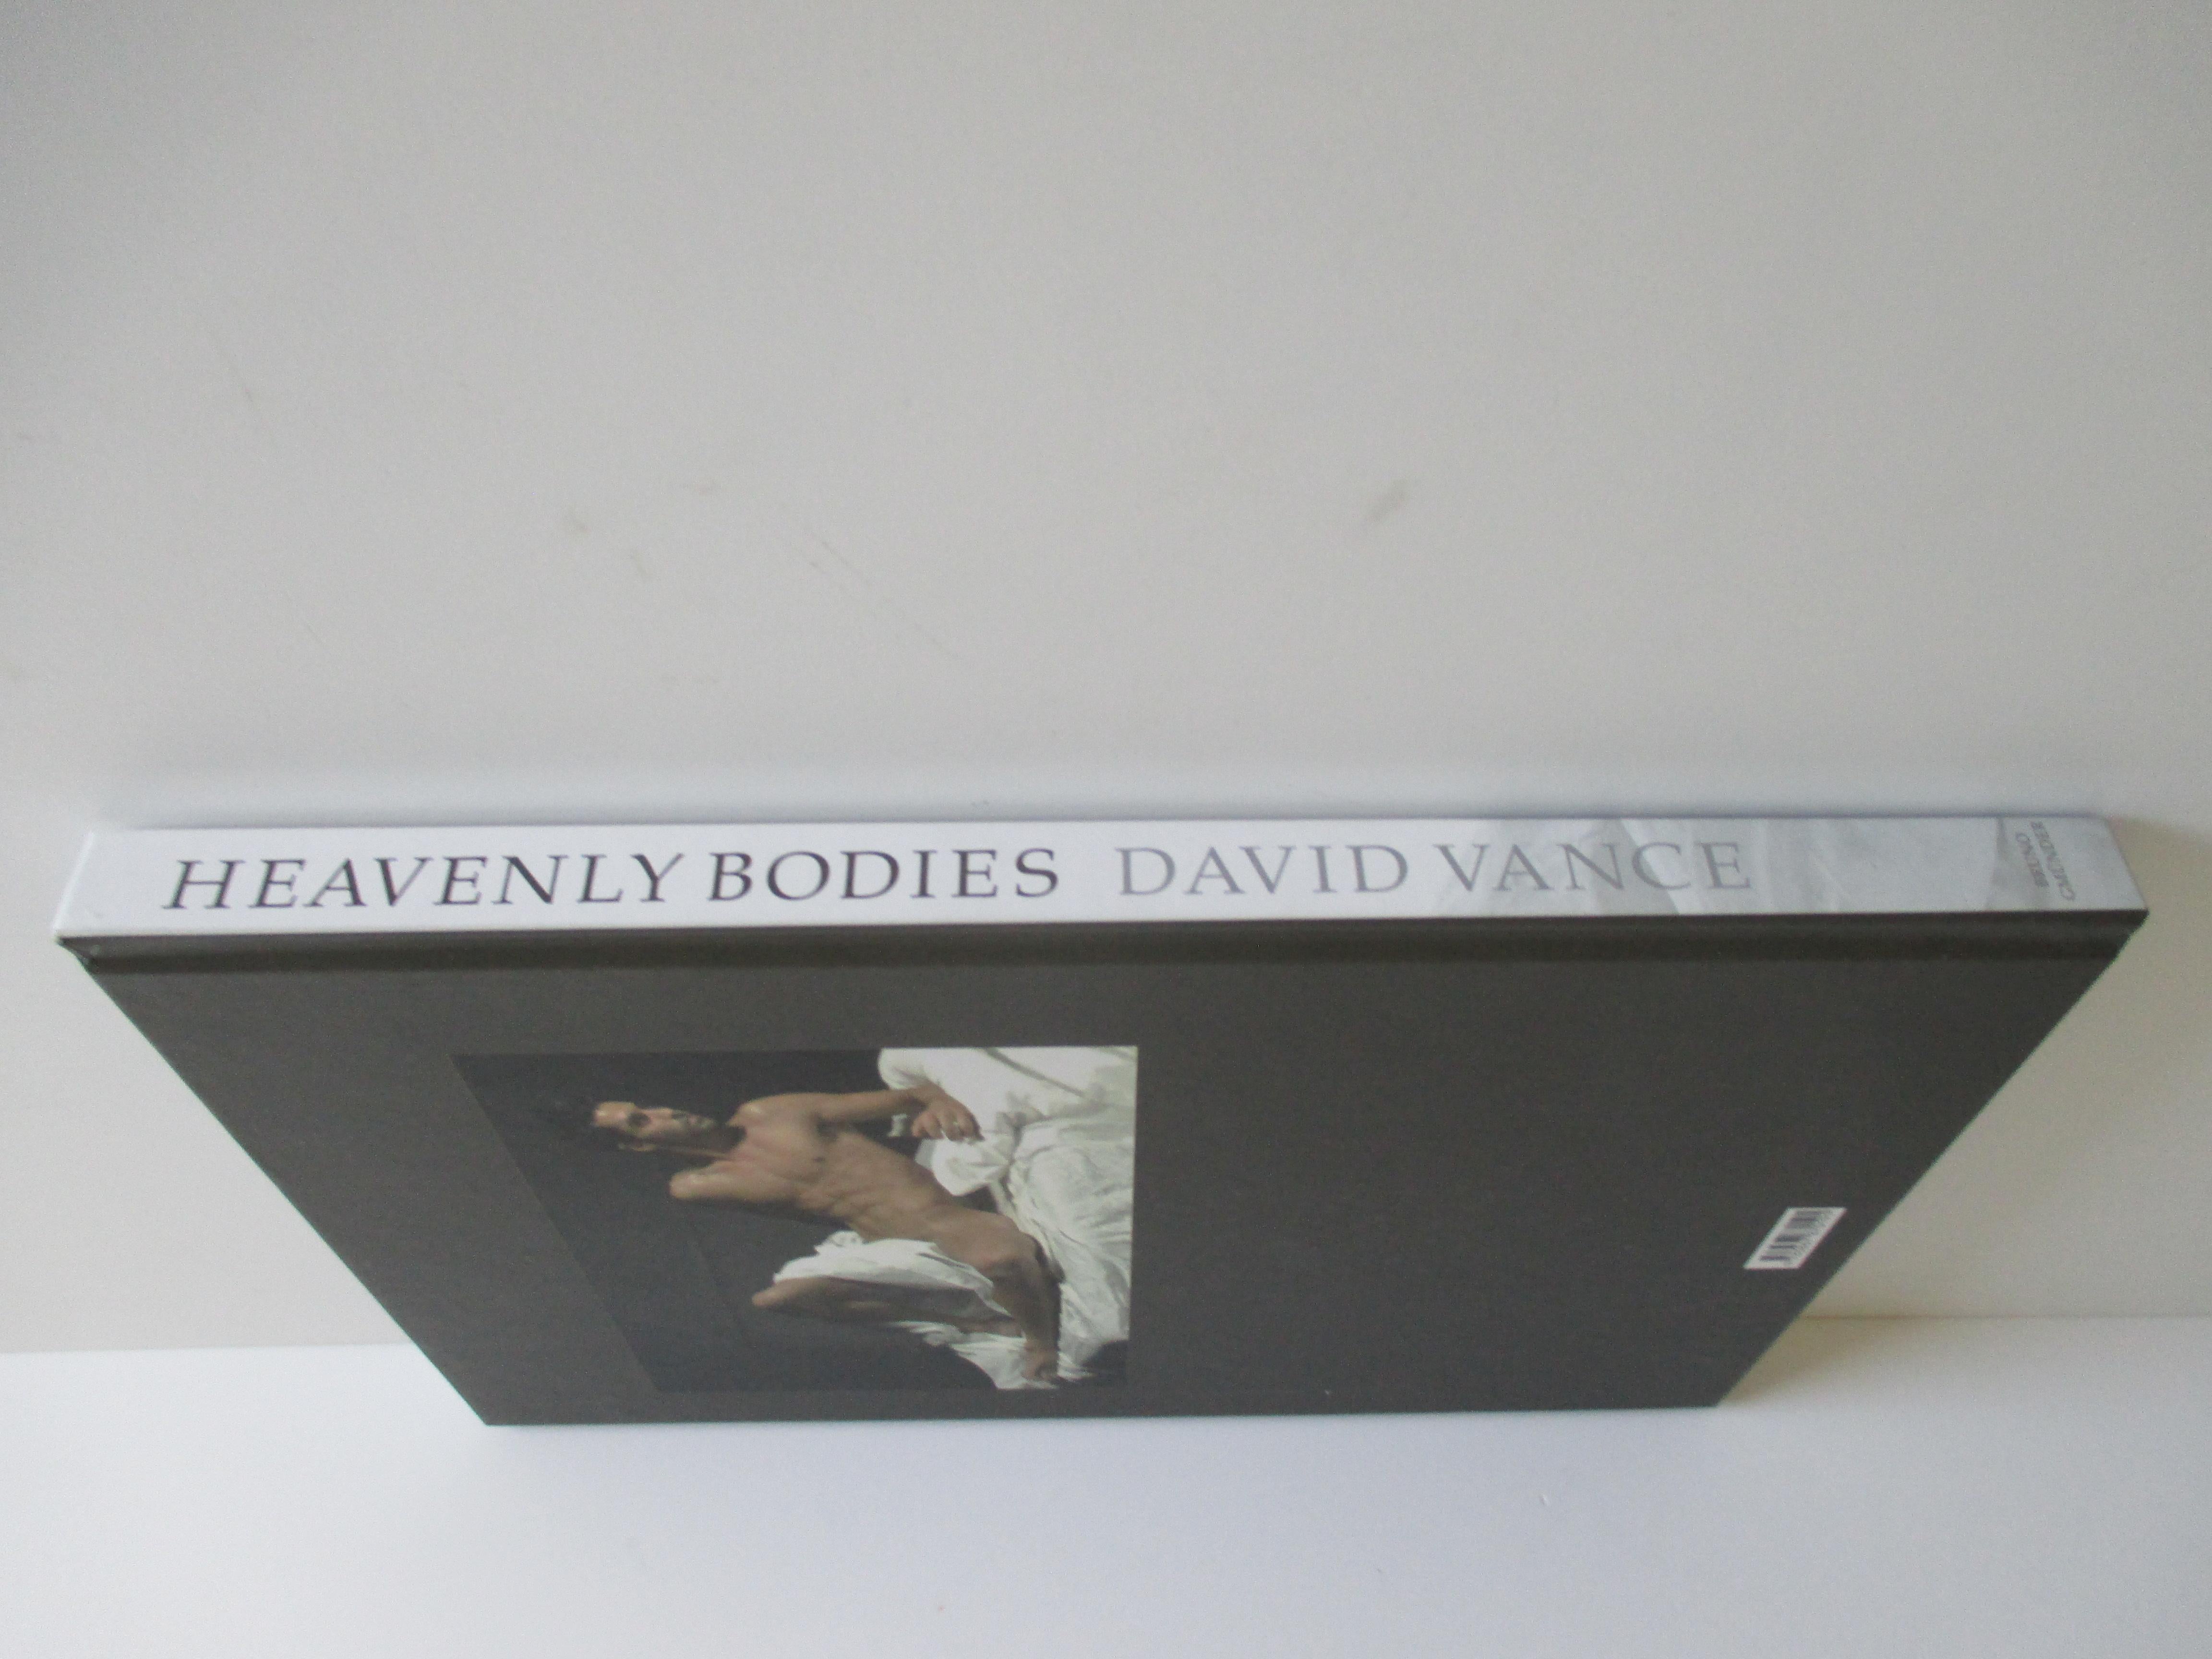 North American Heavenly Bodies Photography Hardcover Book